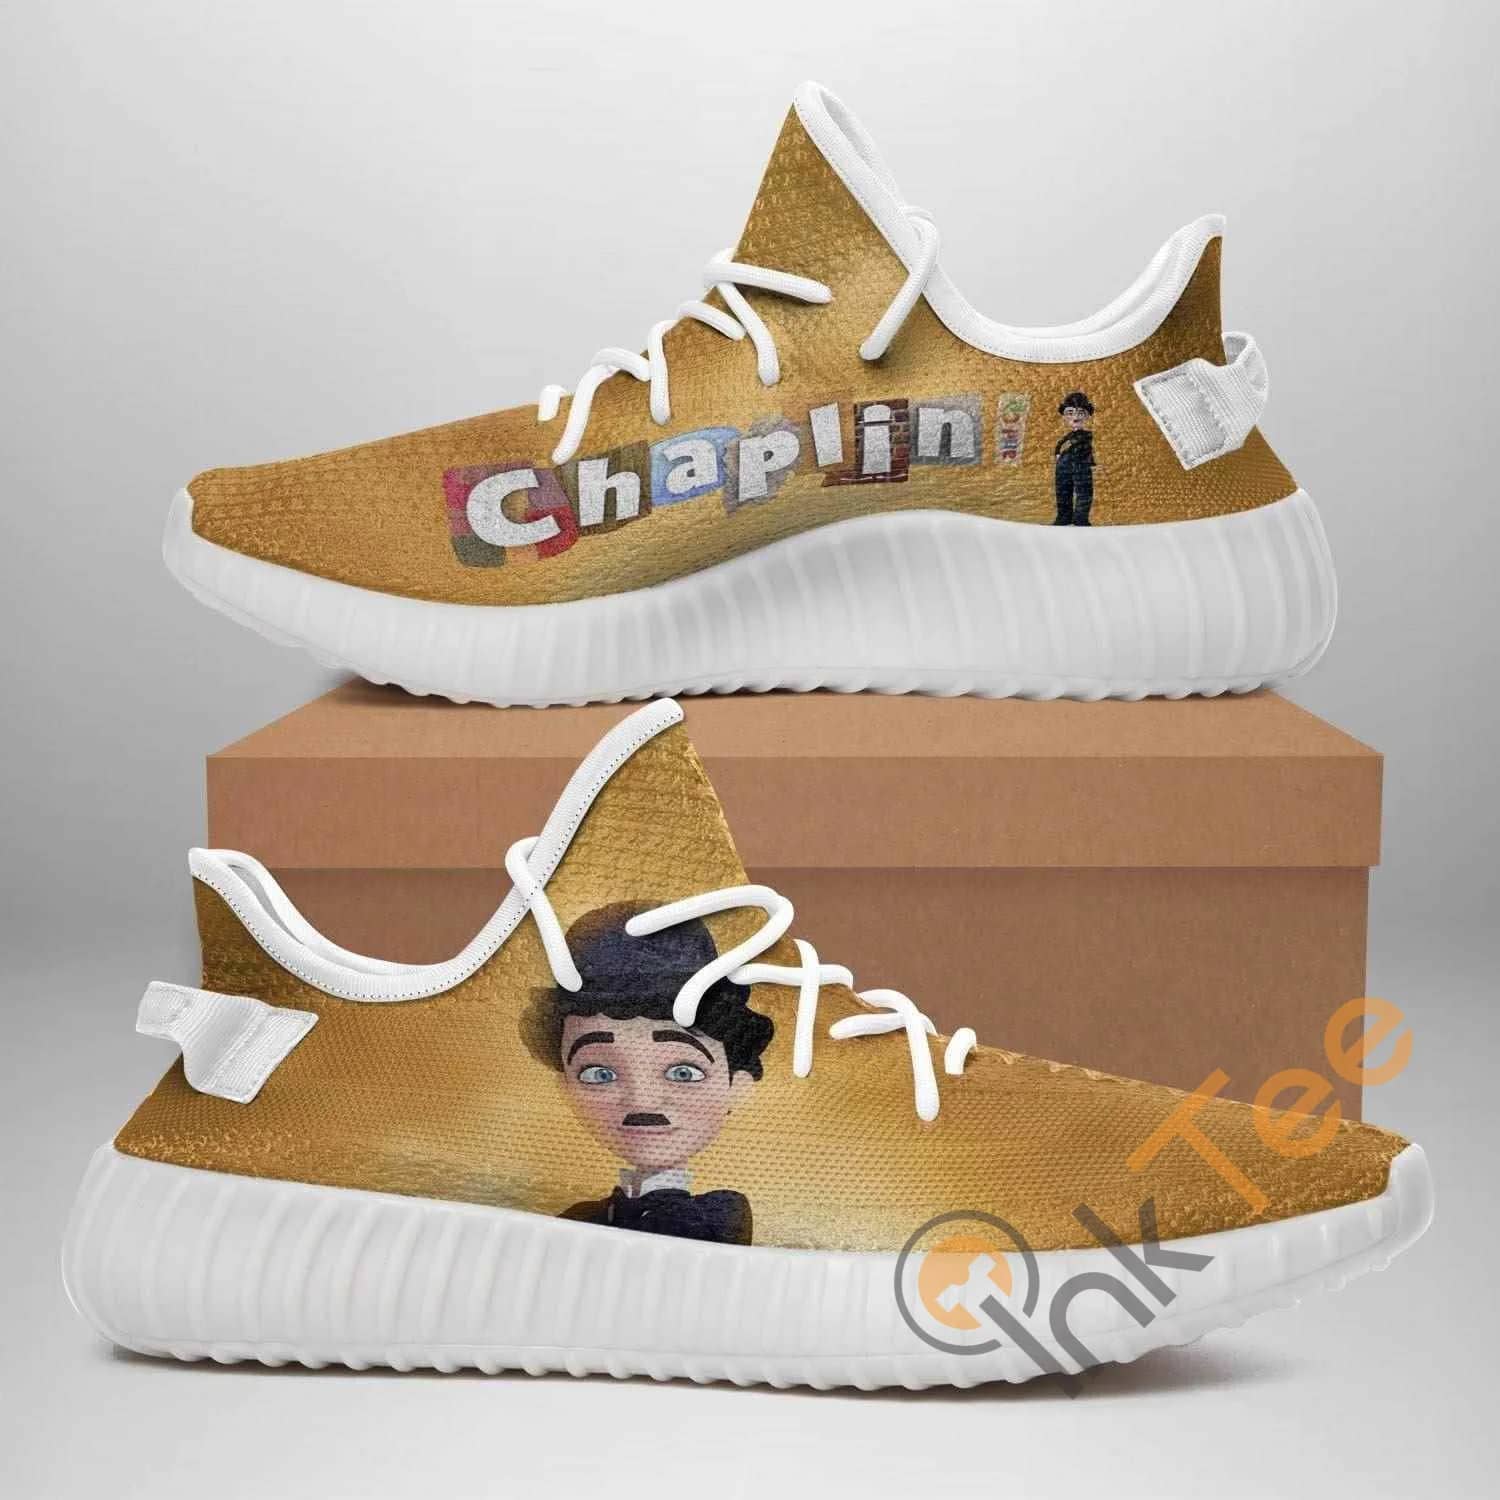 Chaplin And Co Amazon Best Selling Yeezy Boost